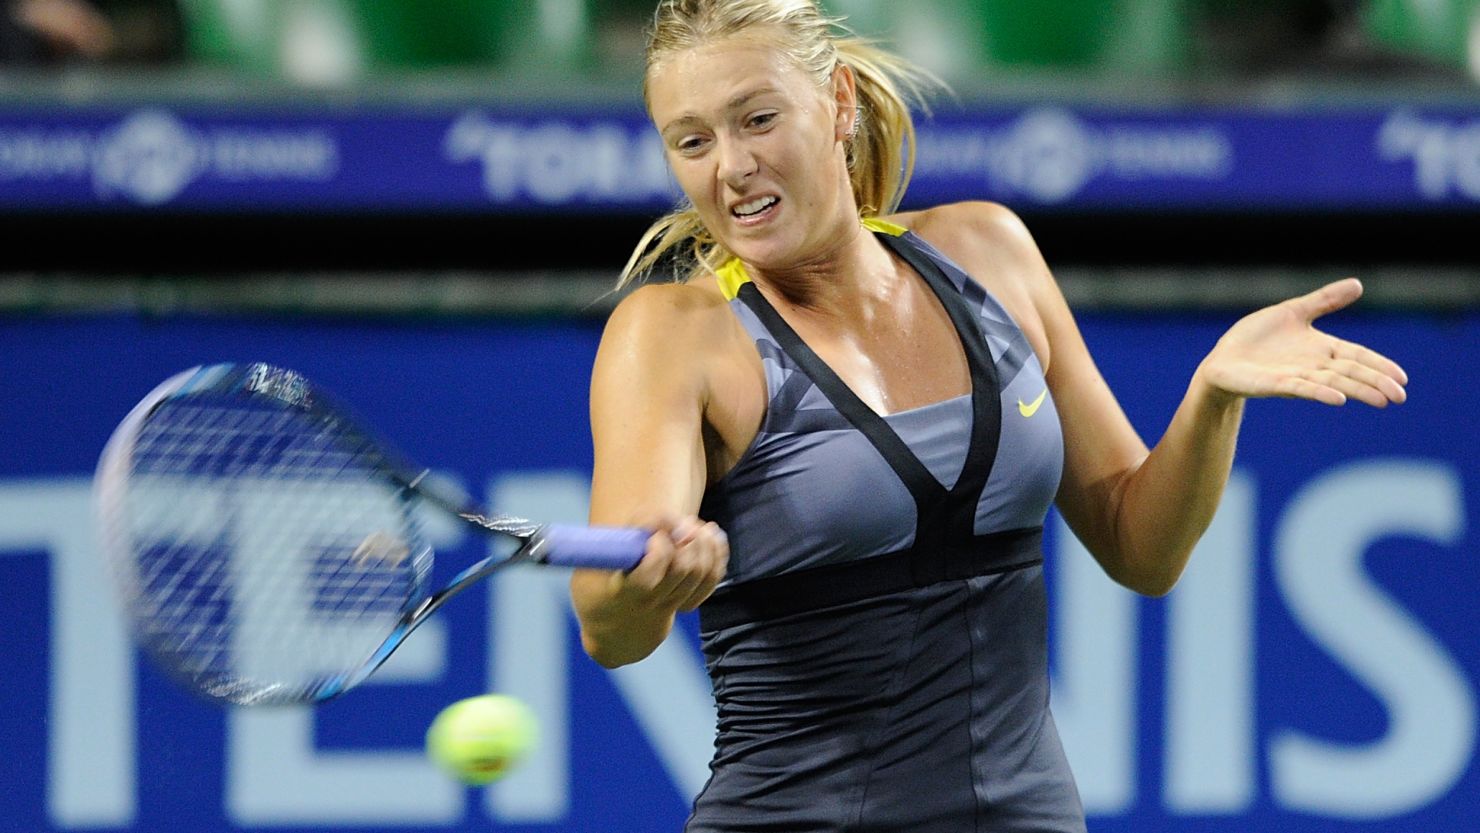 World number two Maria Sharapova eases into the second round of the Pan Pacific Open 